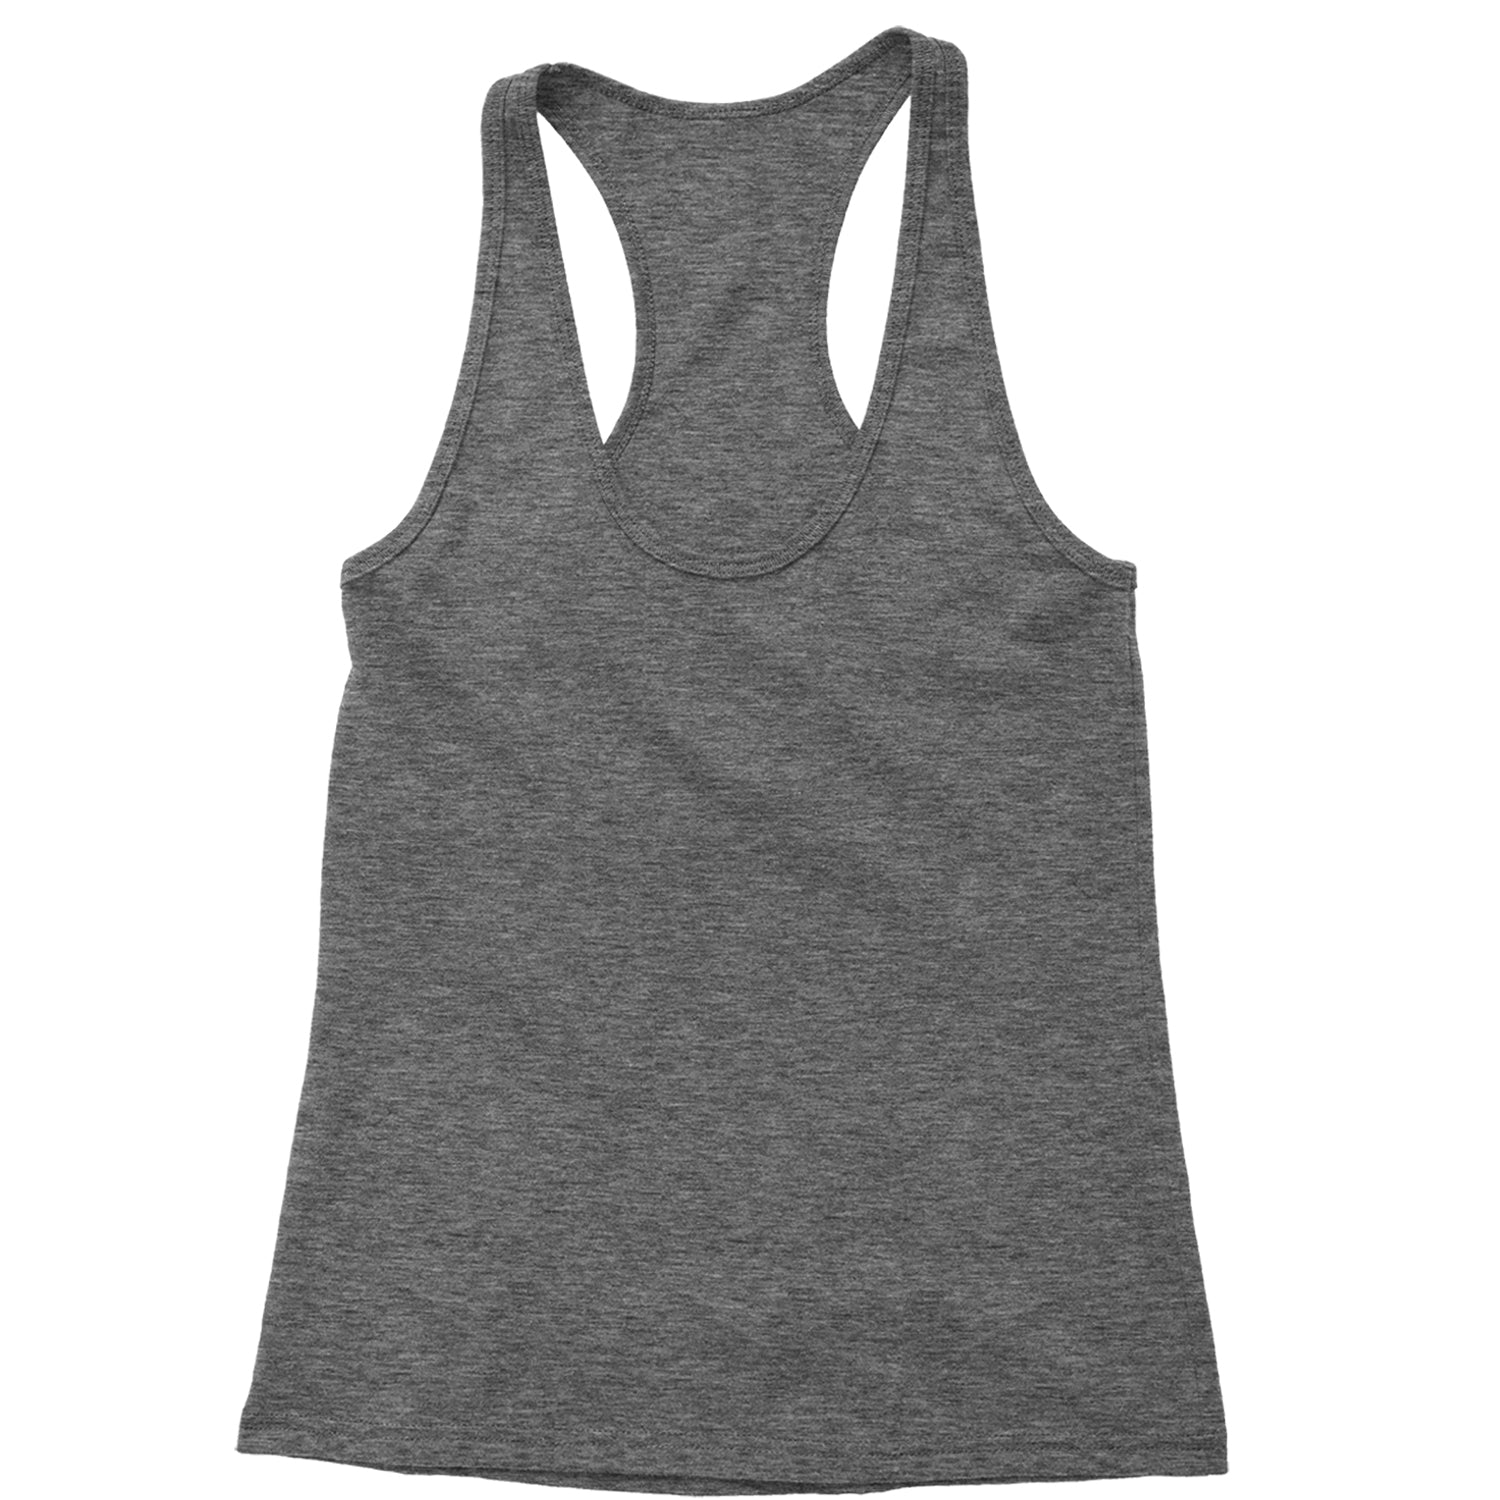 Custom Tank Tops | Women's Racerback Tanks & Men's Tank Tops create your own, custom, CustomClothing, customized, personalized by Expression Tees